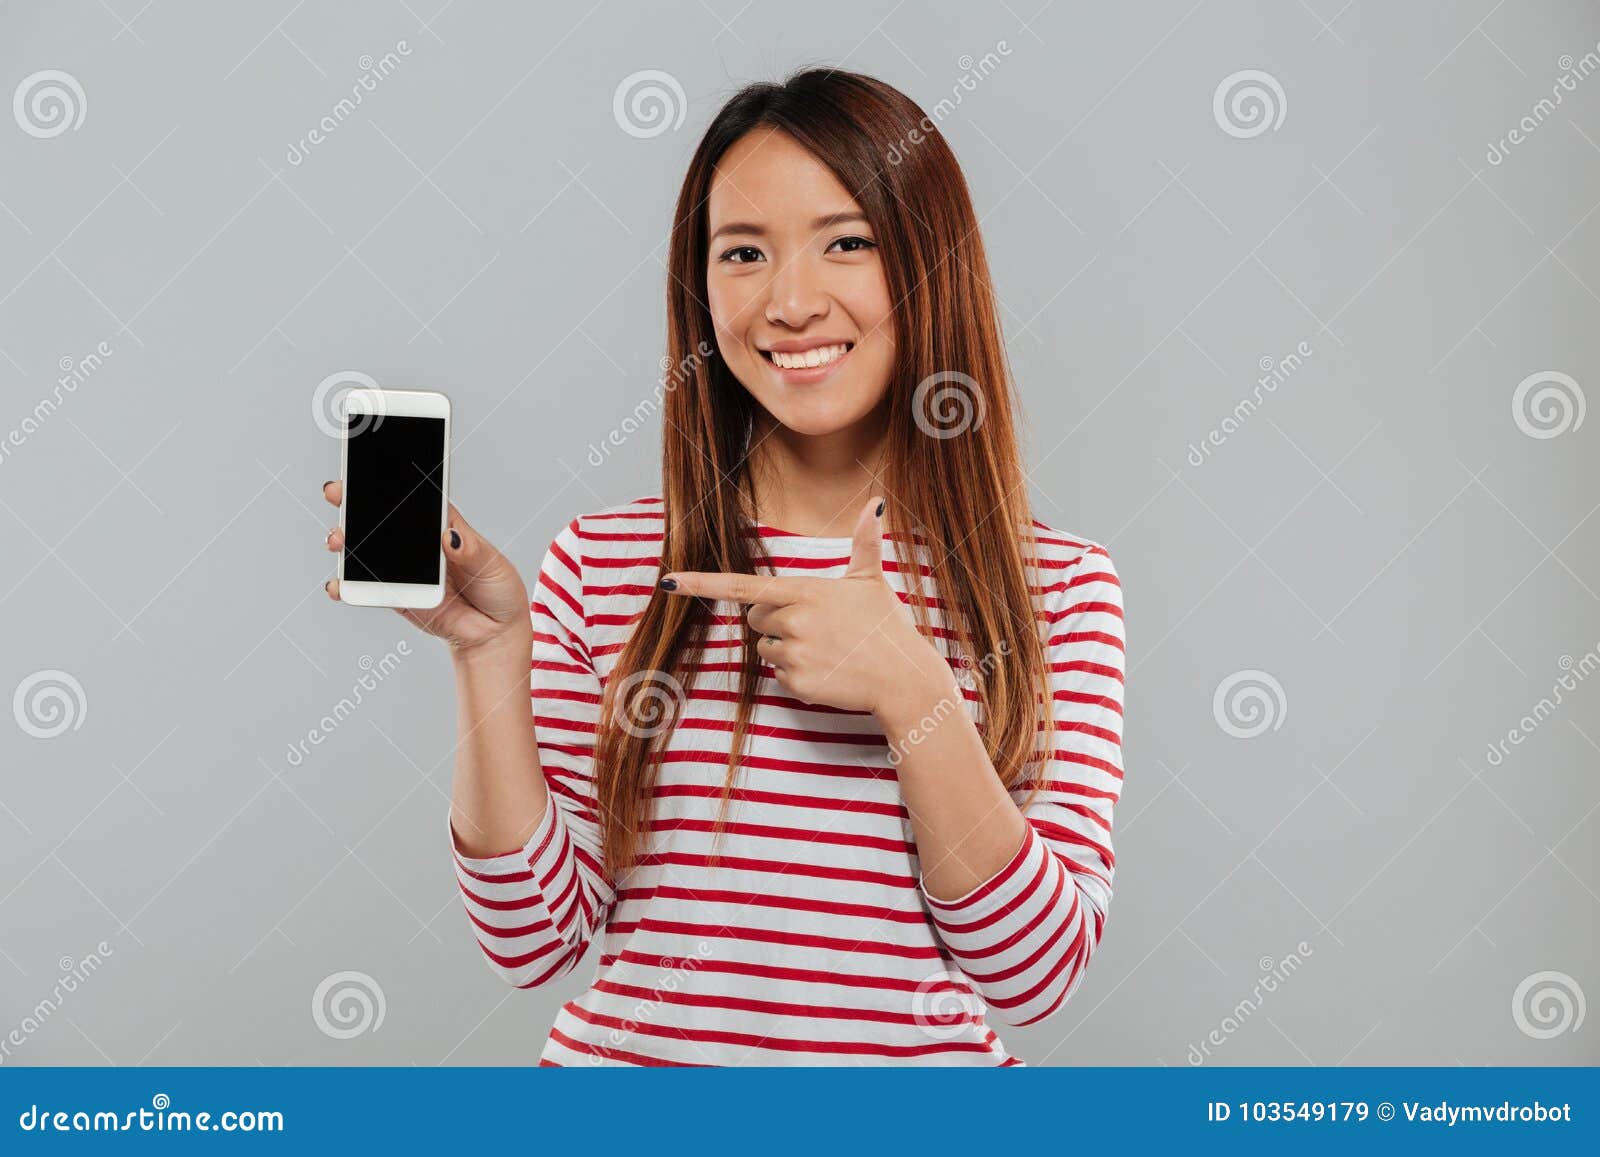 smiling young asian woman showing display of phone